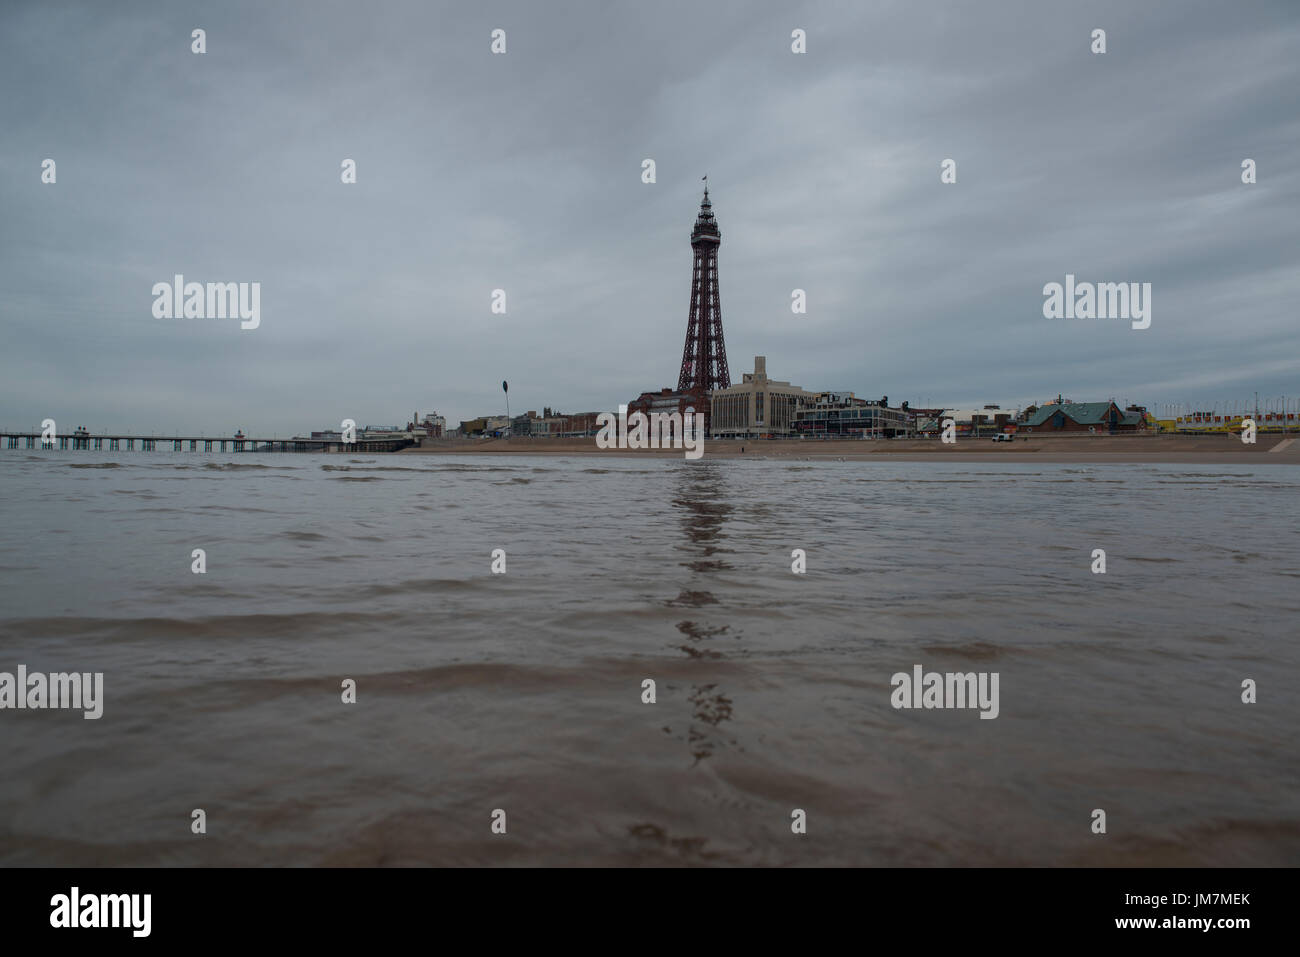 Blackpool tower, view from the beach. credit: LEE RAMSDEN / ALAMY Stock Photo